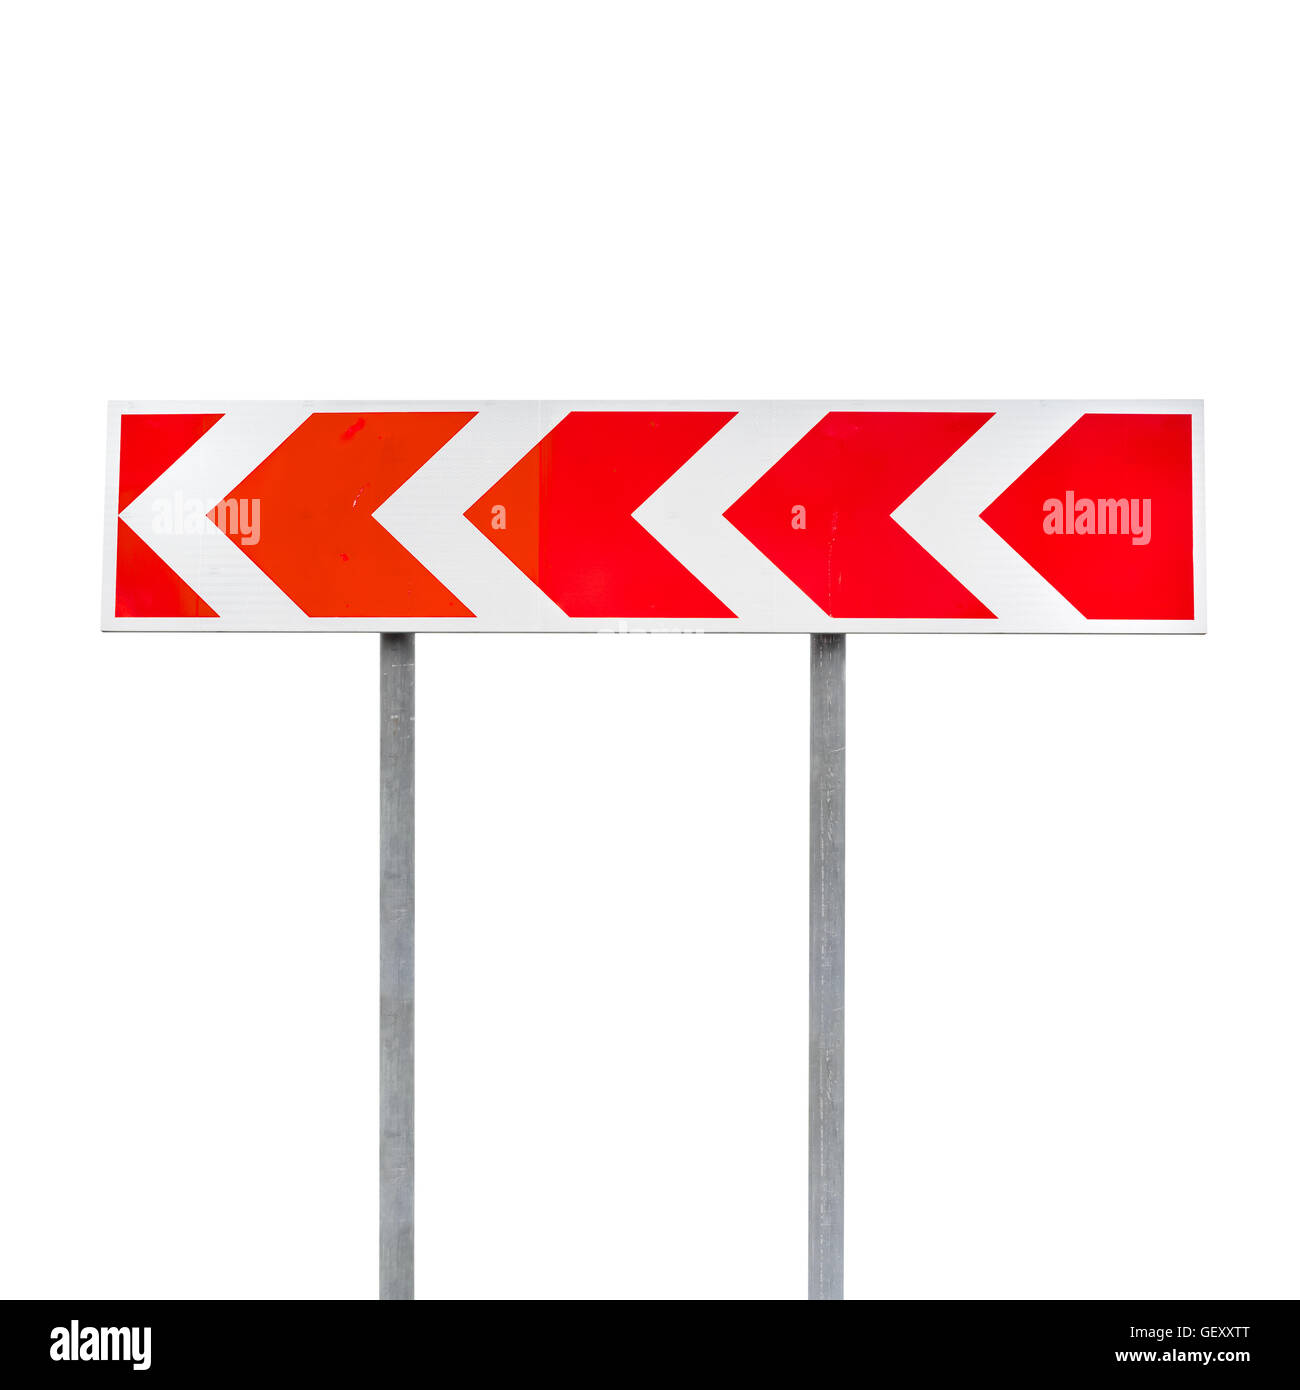 Dangerous turn. Red and white stripped arrow. Road sign isolated on white background Stock Photo